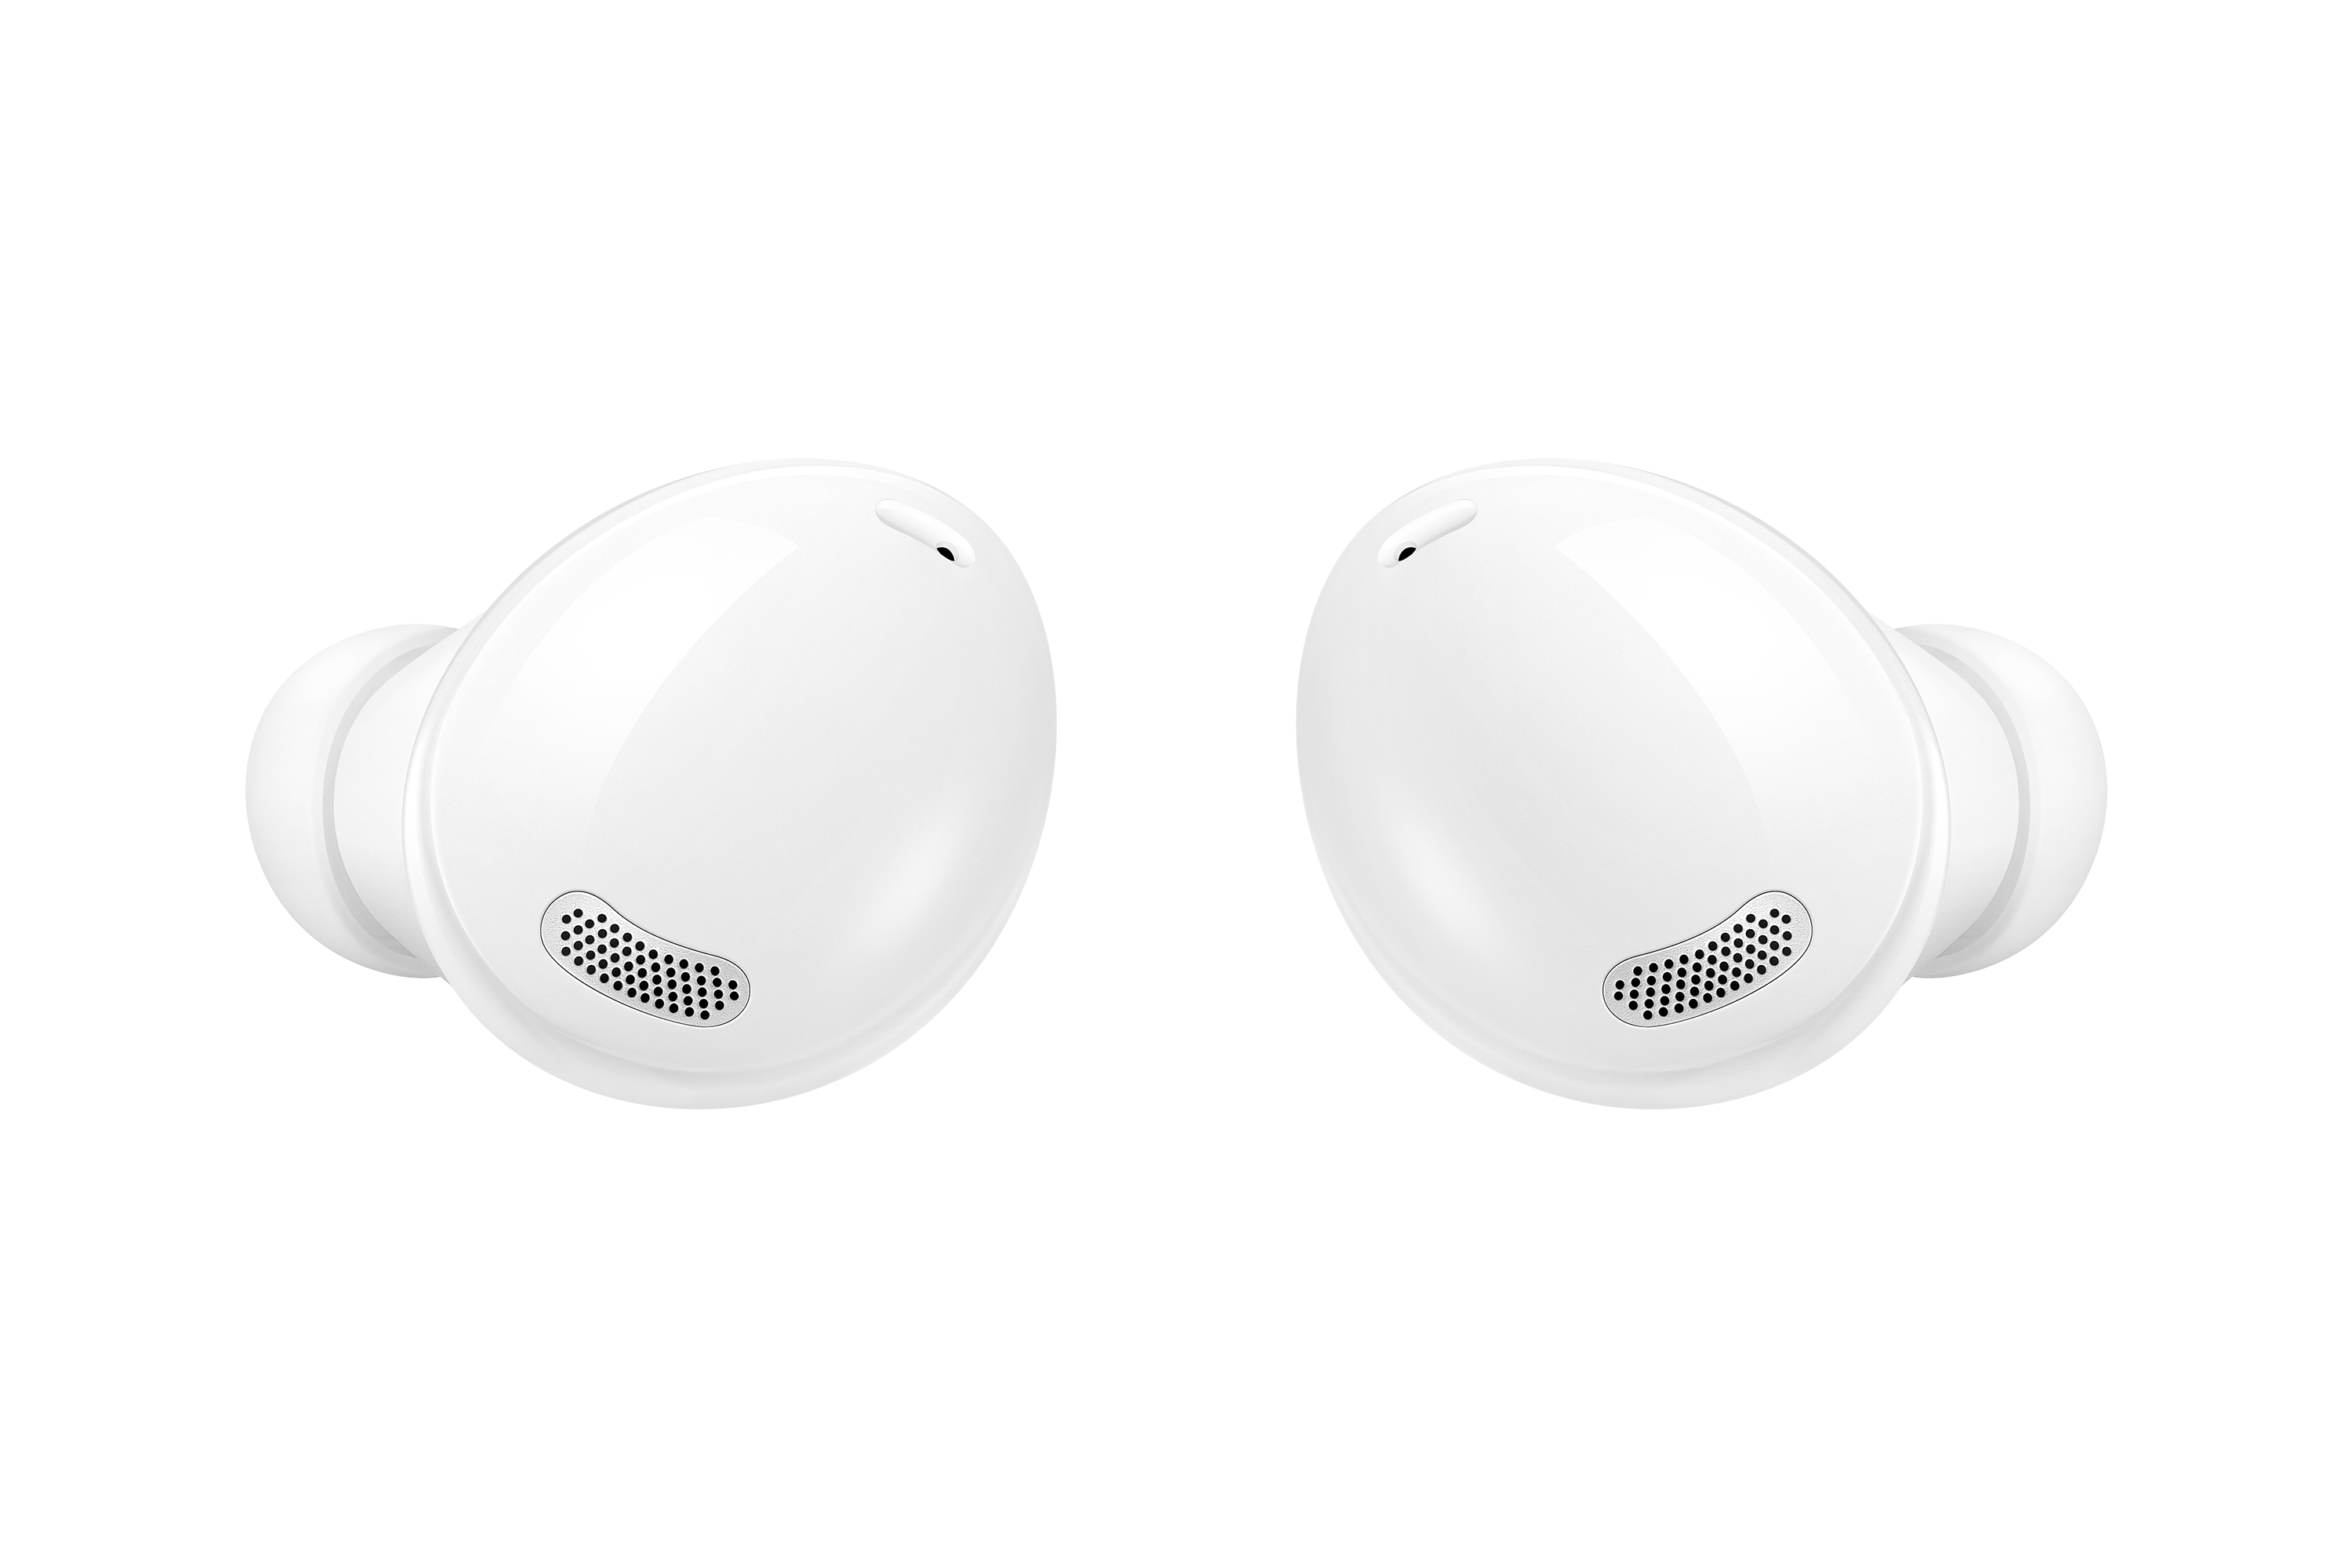 Galaxy Buds Pro now comes in an irresistible white color - Gizmochina